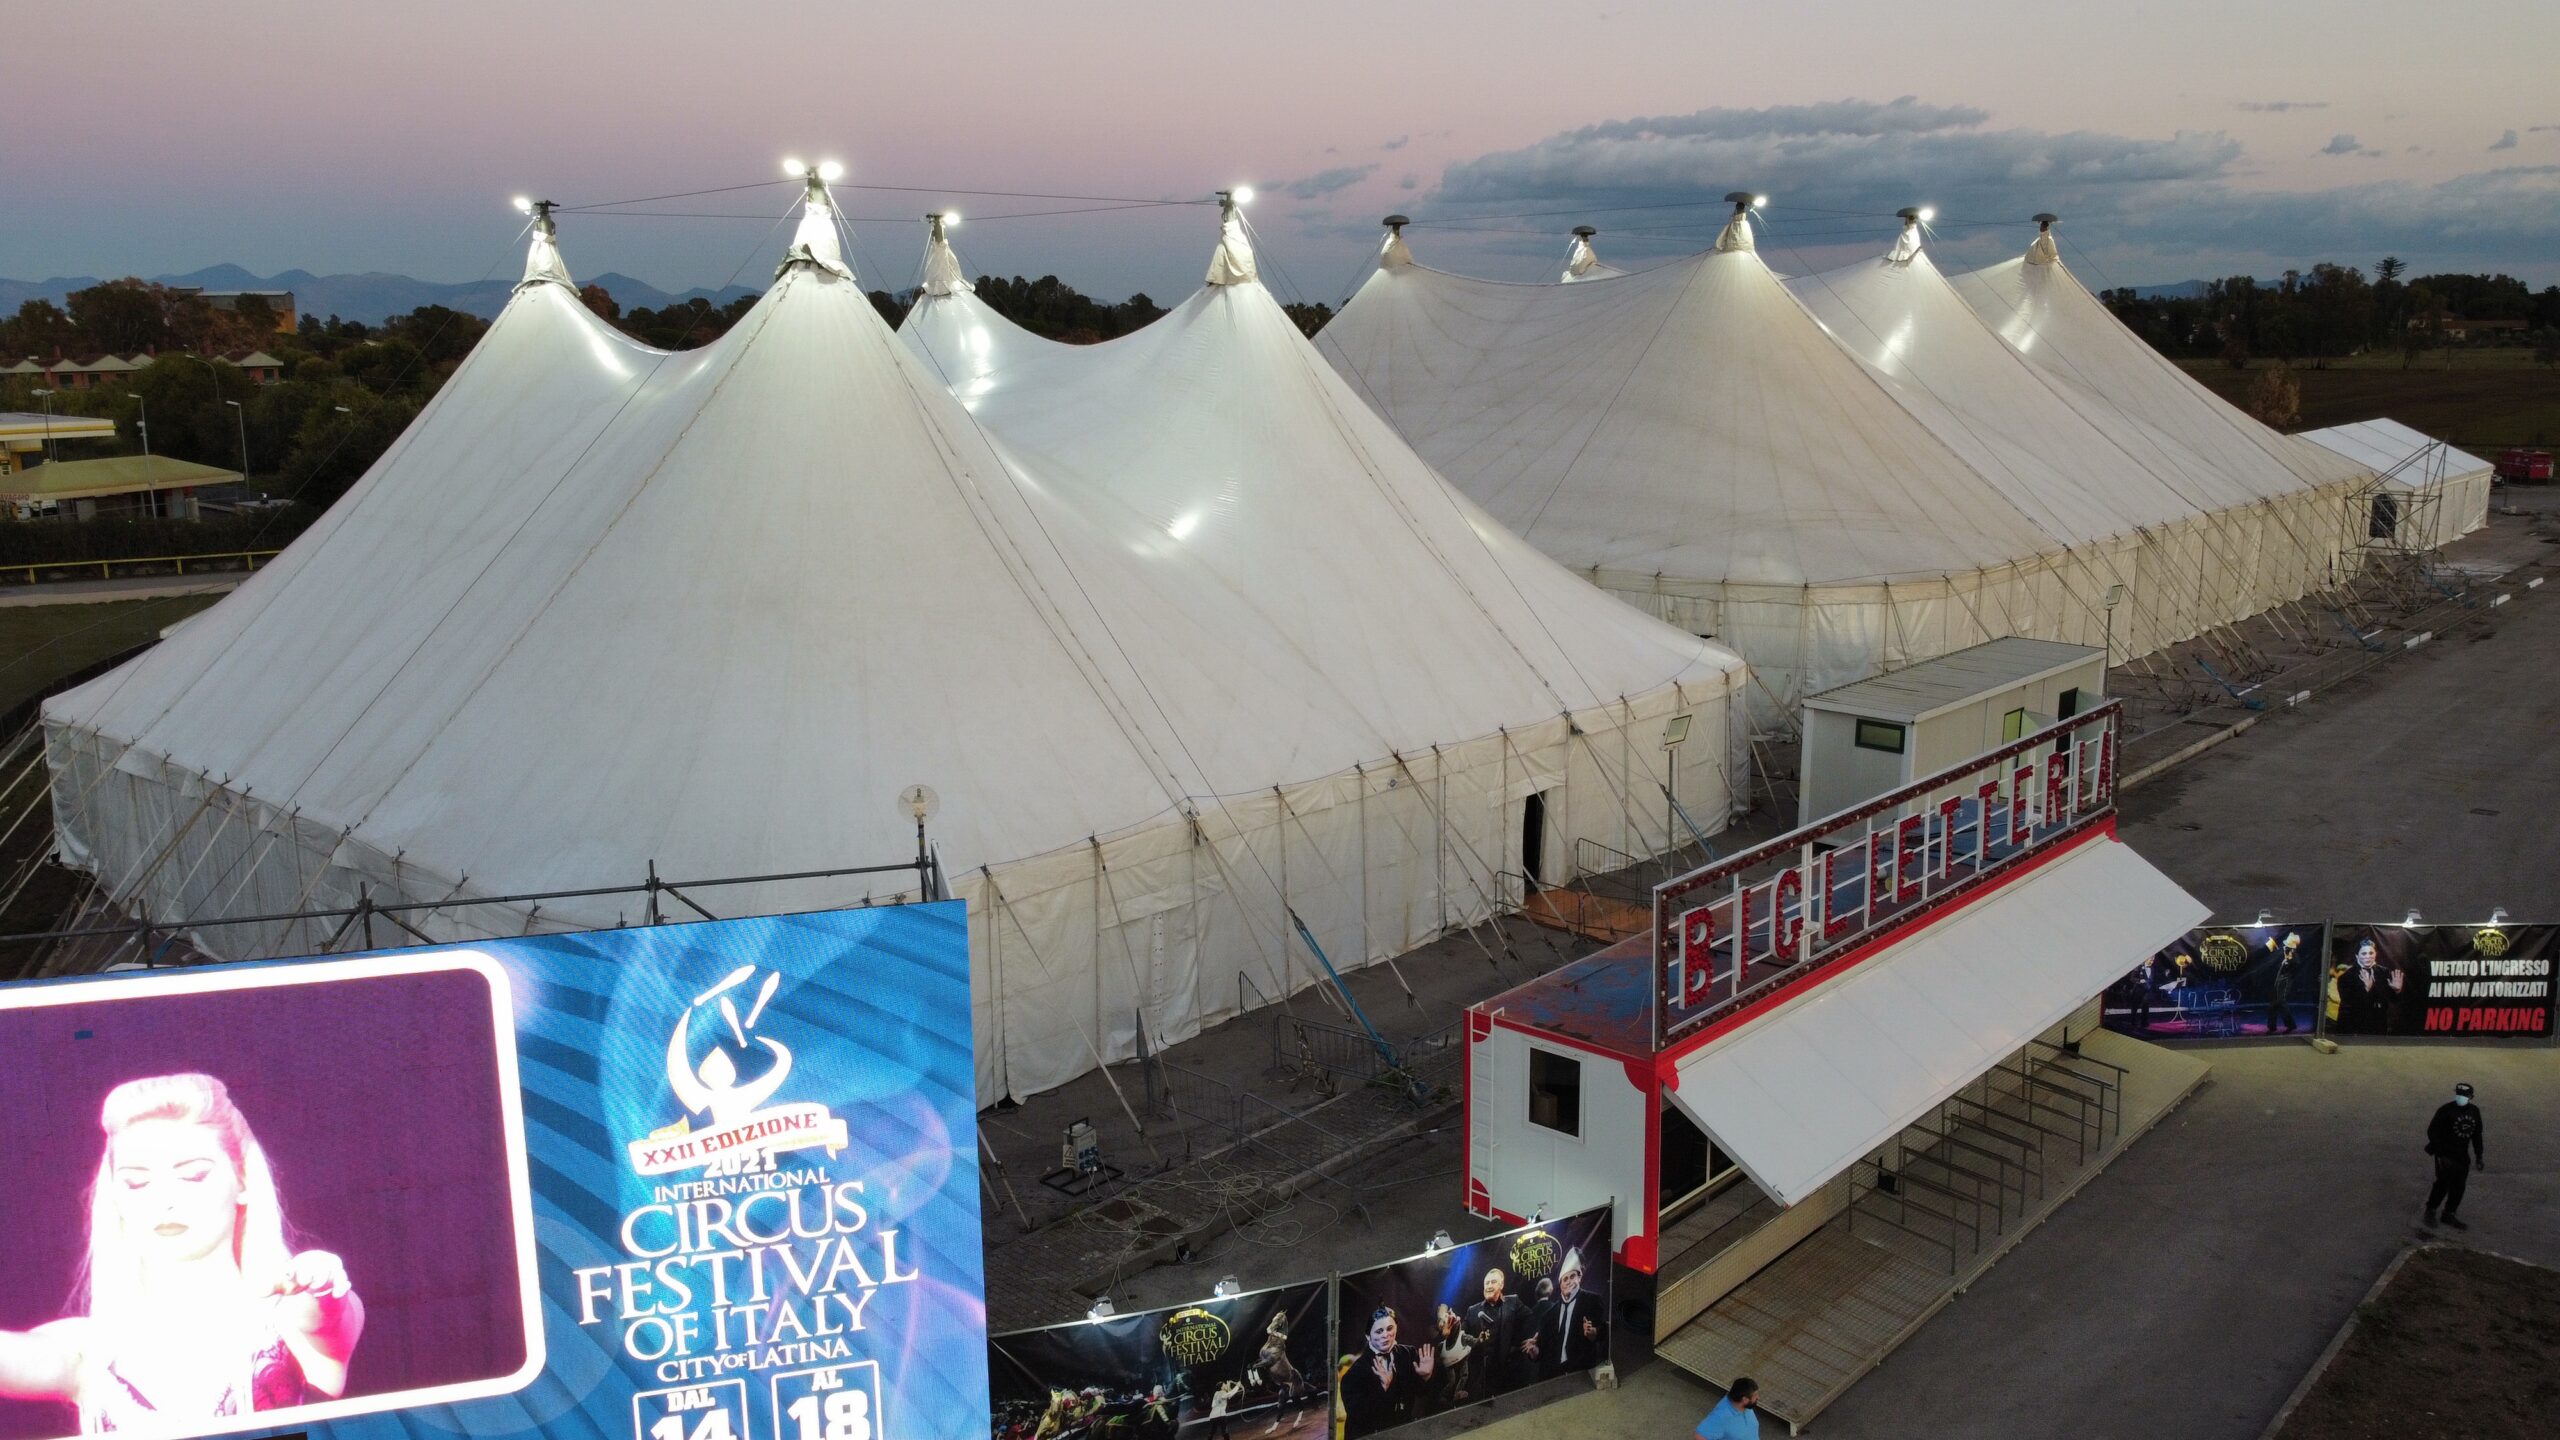 The 23rd edition of the ‘International Circus Festival of Italy’